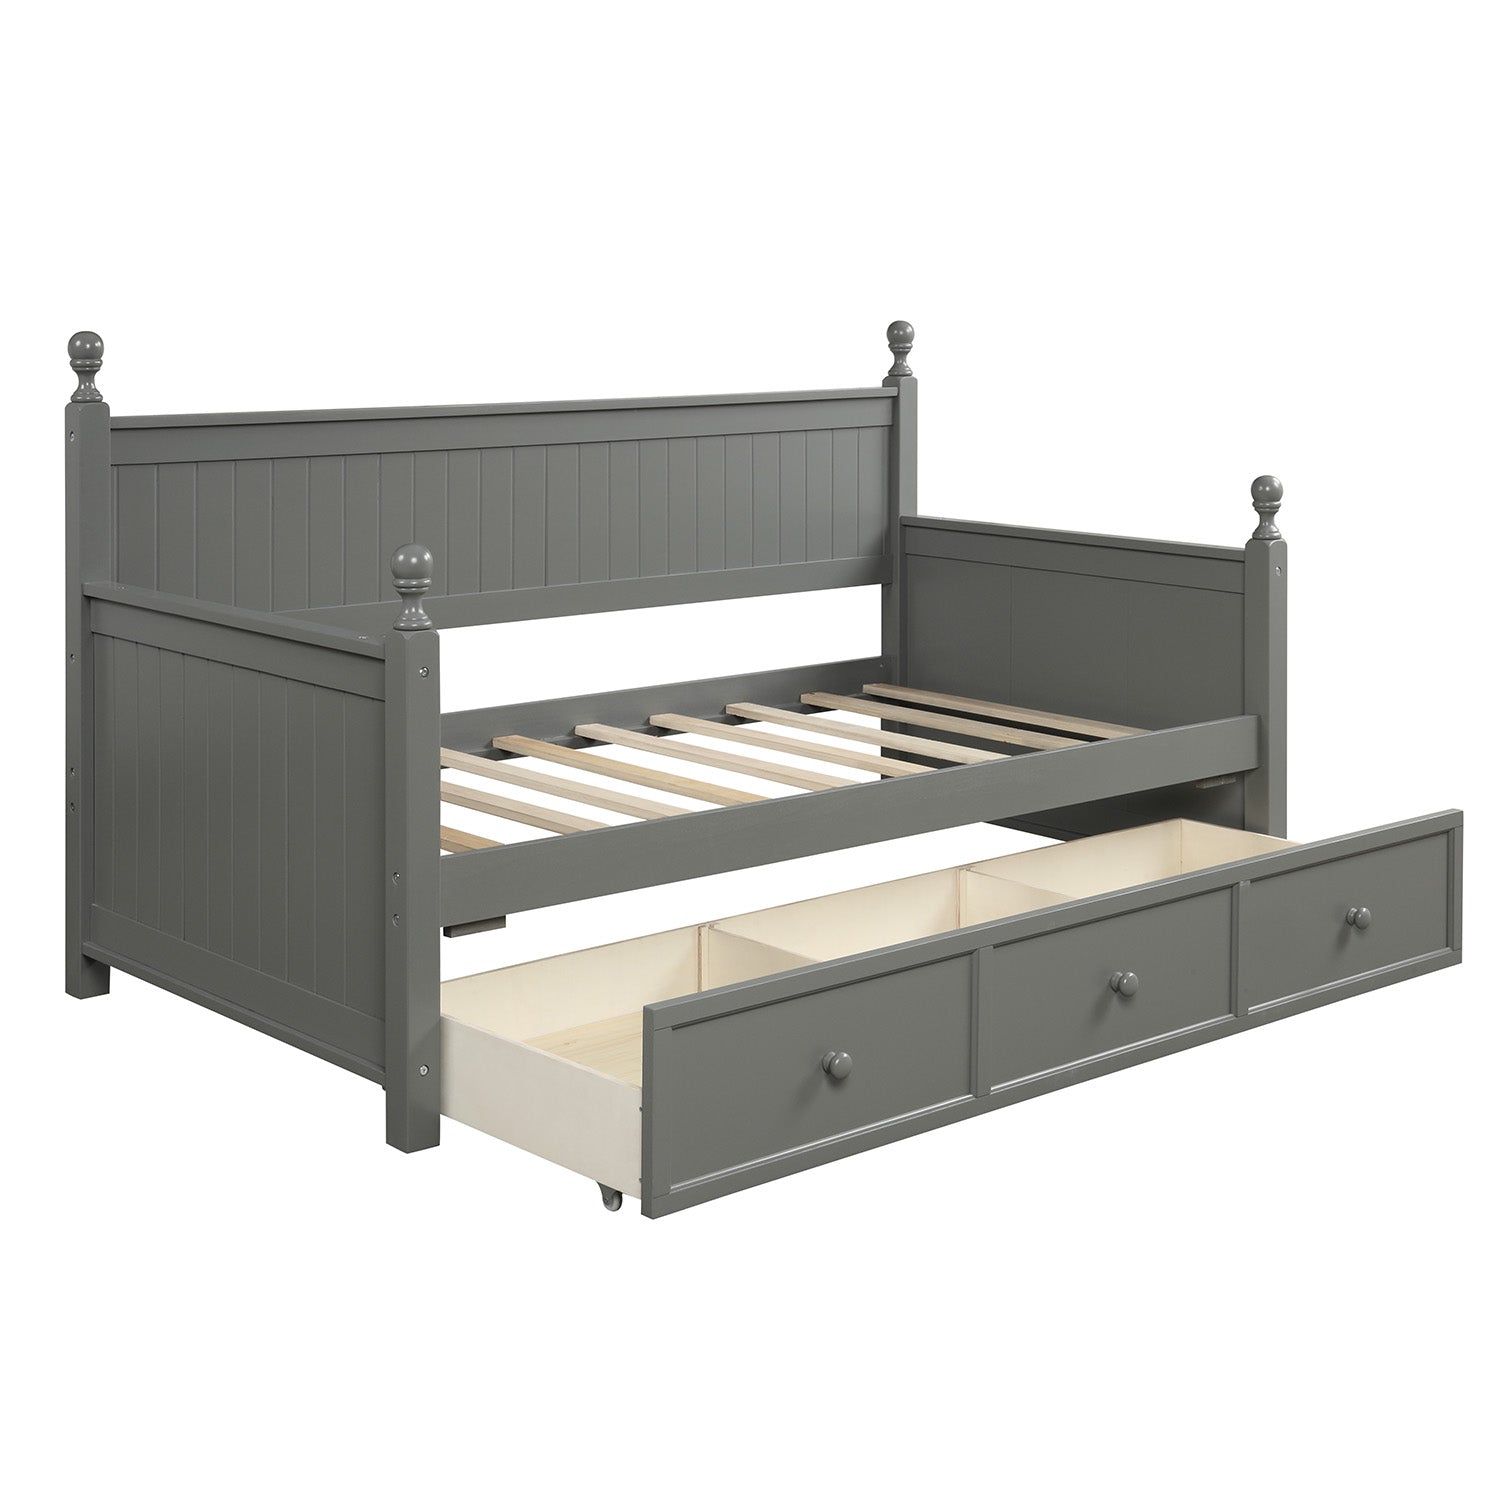 Bellemave Twin Size Daybed with Three Drawers - Bellemave